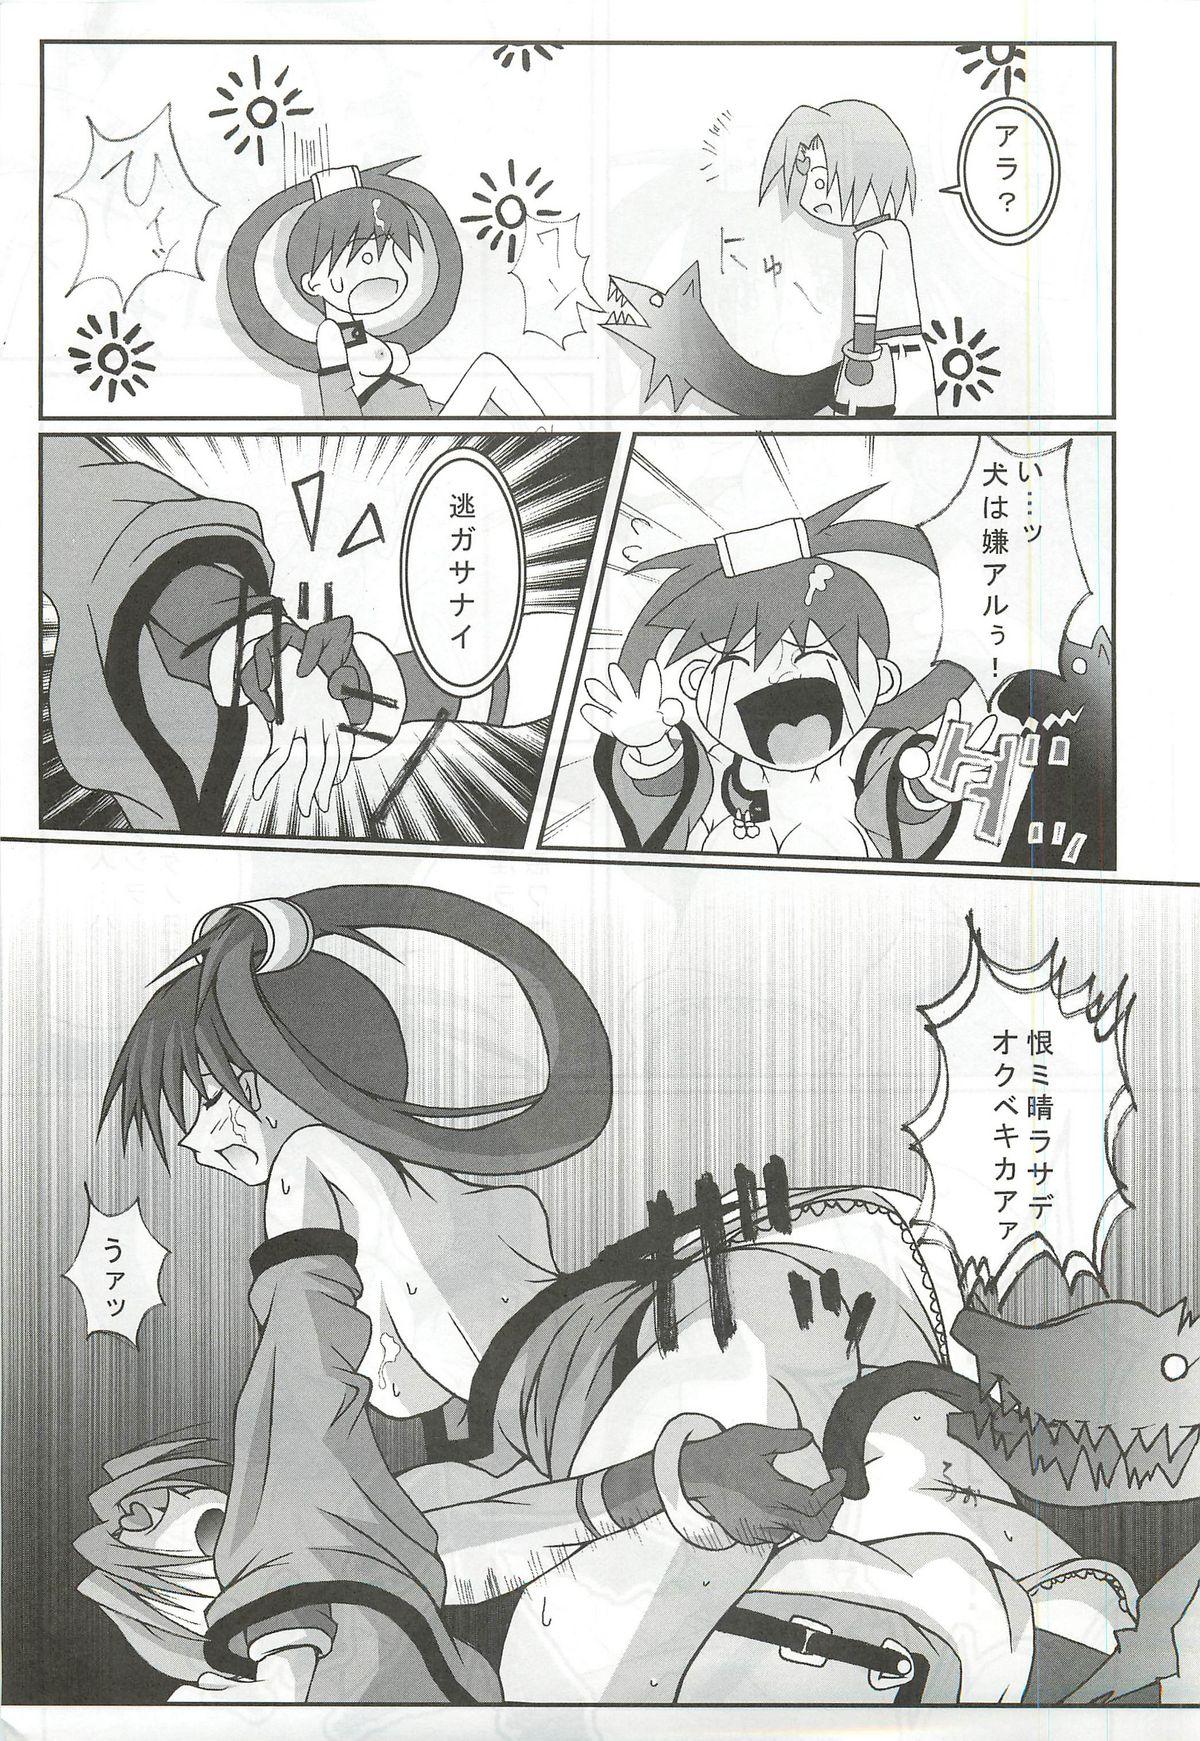 Tanned Passionless 2 - Guilty gear Club - Page 8